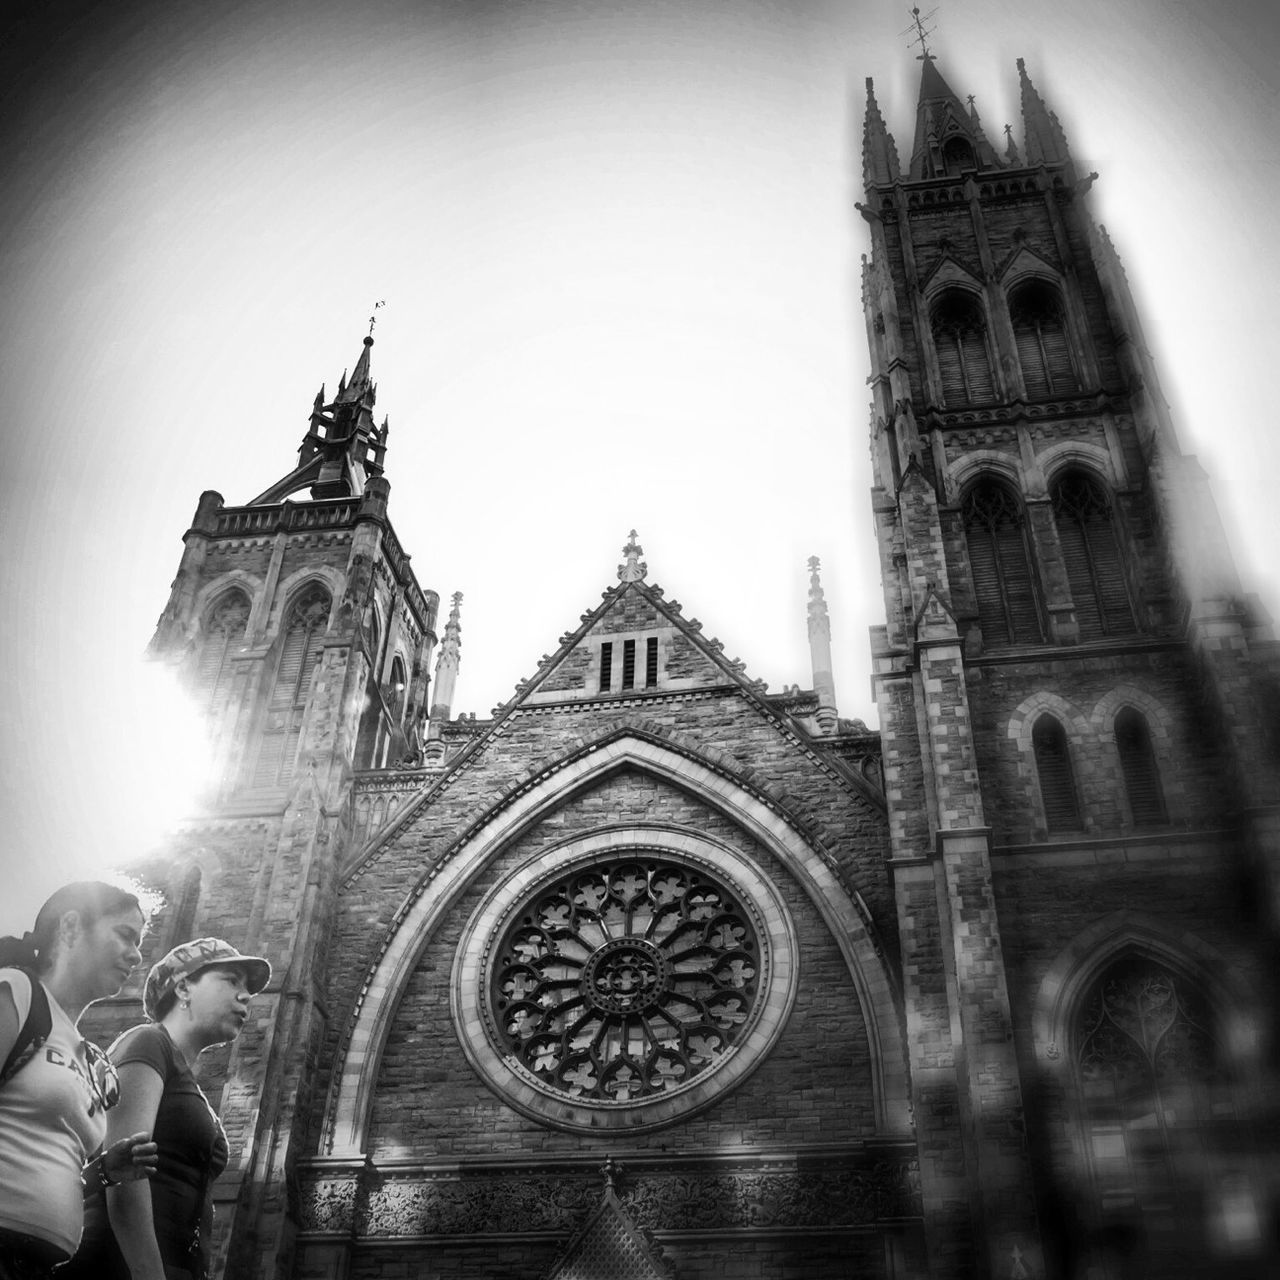 church, religion, architecture, place of worship, spirituality, building exterior, built structure, cathedral, low angle view, clear sky, auto post production filter, history, famous place, travel destinations, transfer print, sky, clock tower, cross